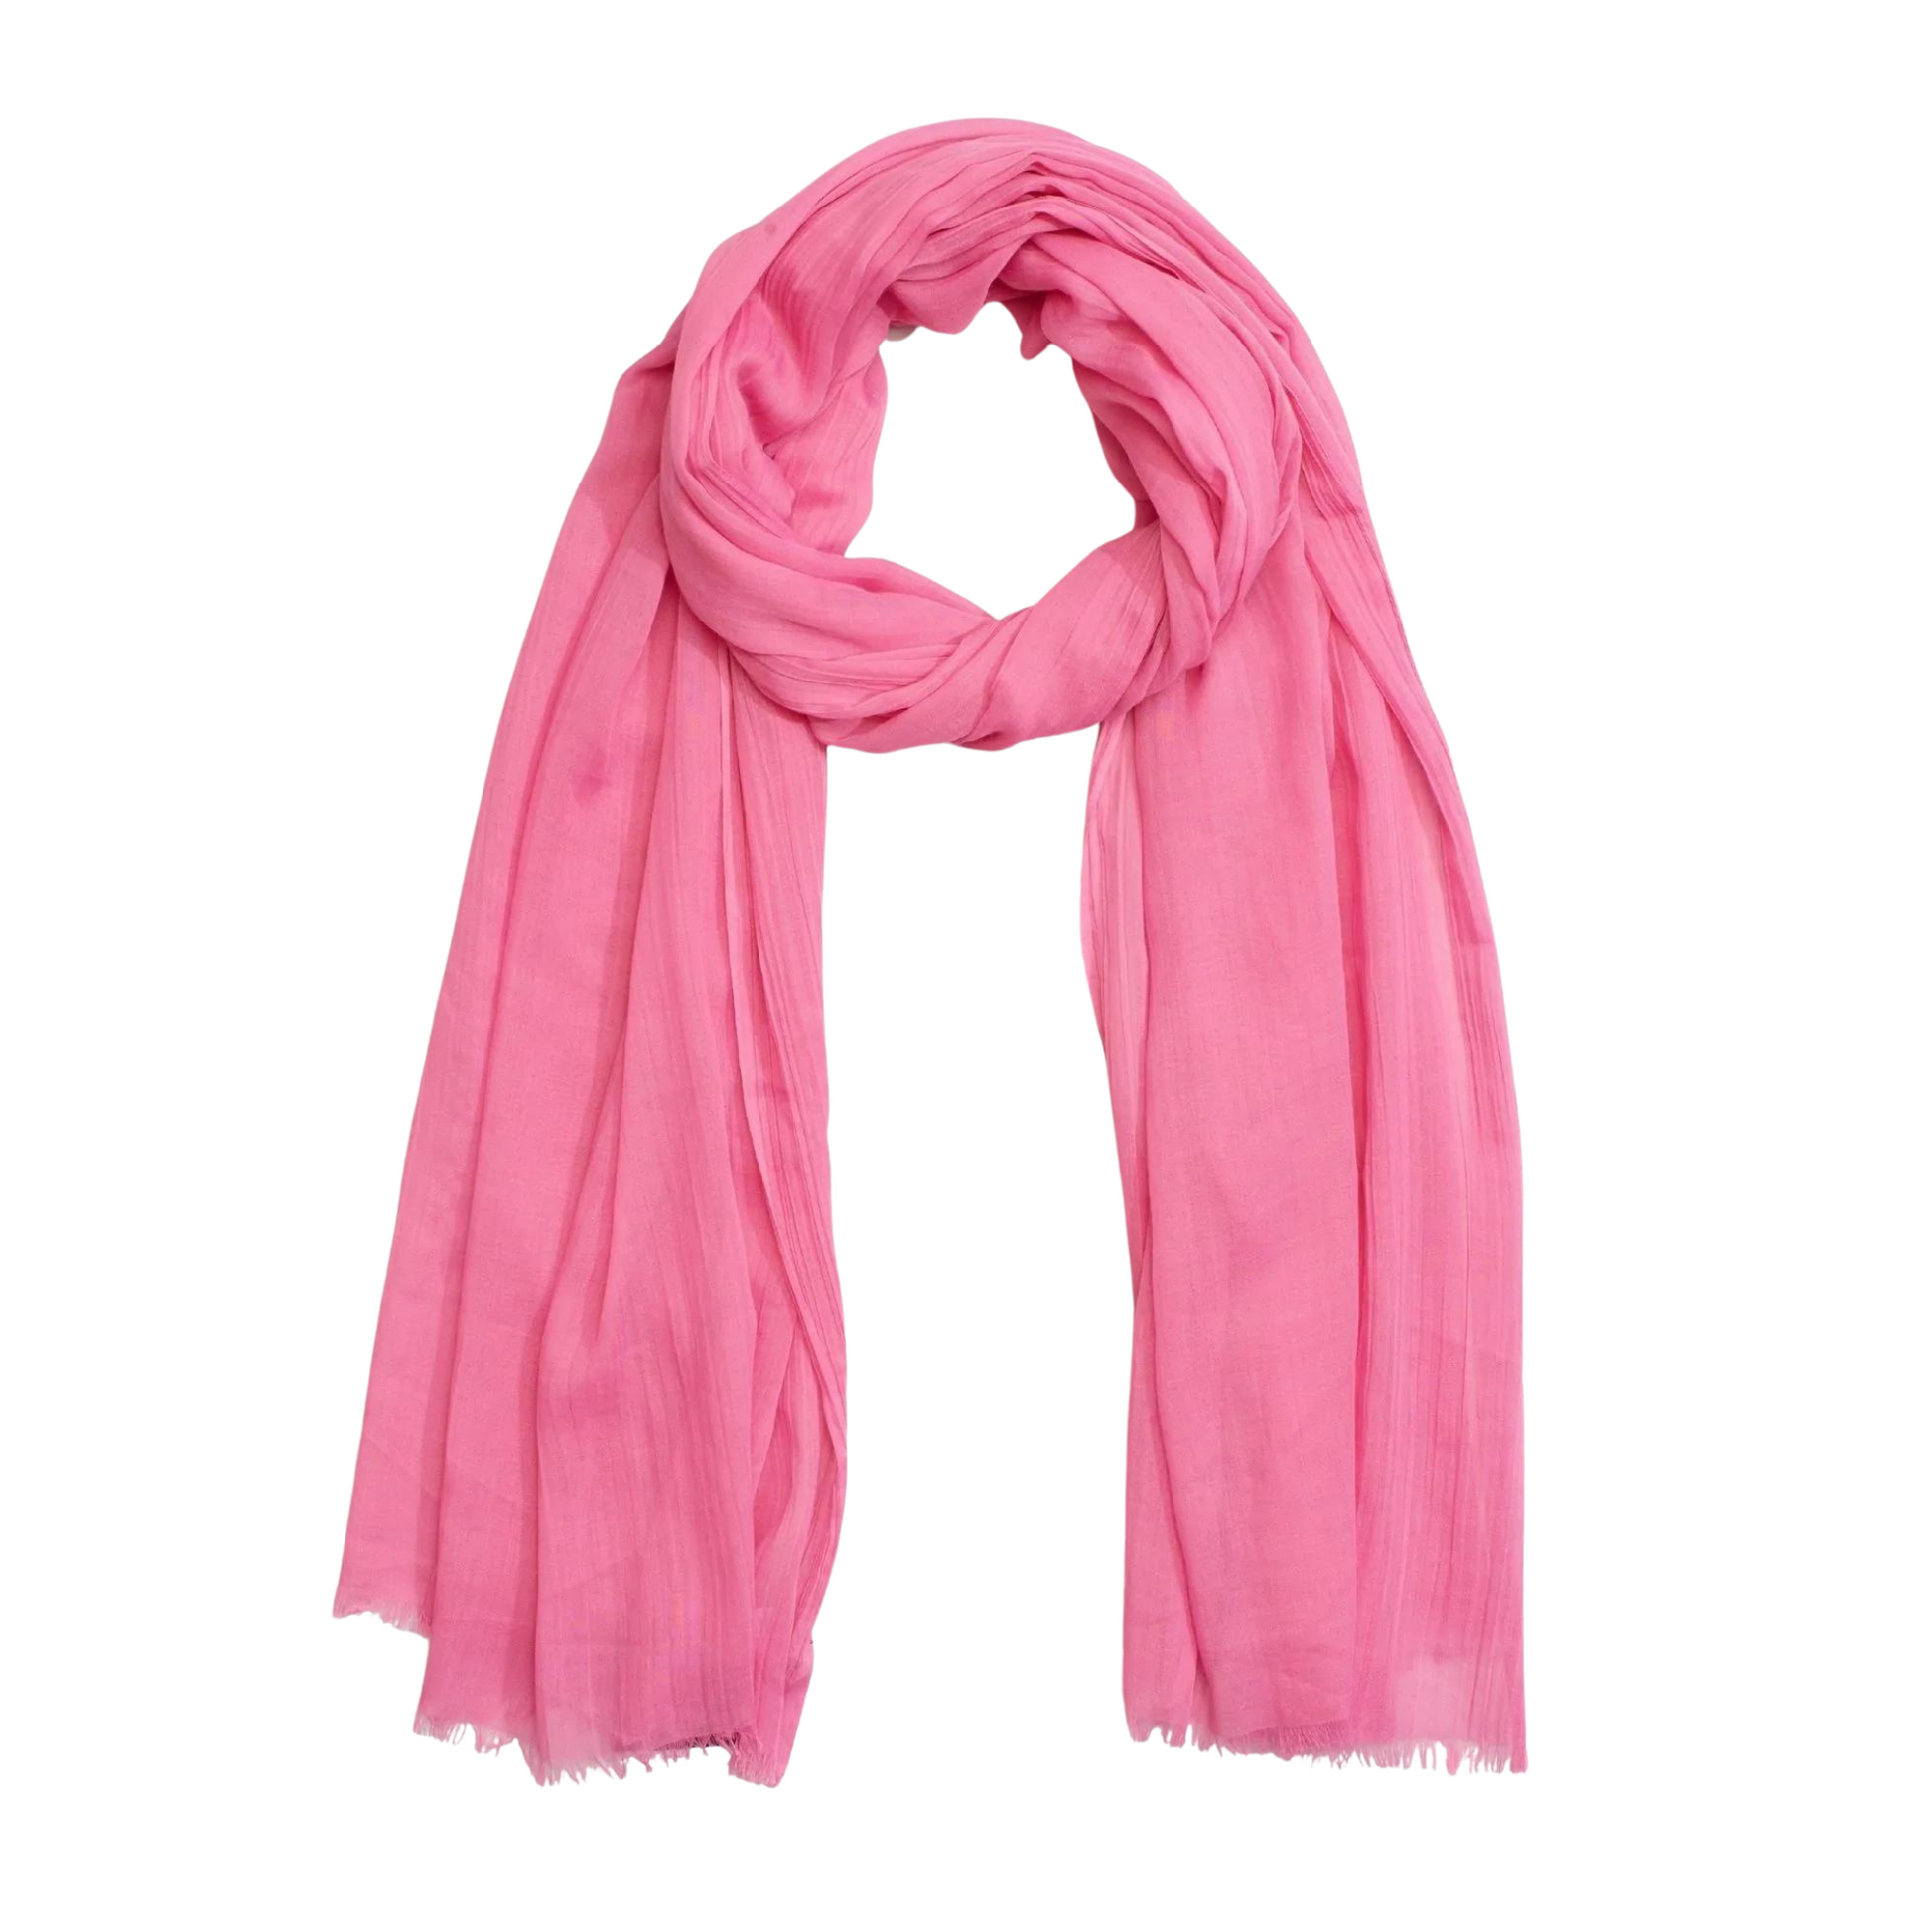 A pink translucent scarf is pictured with a small loop bunched at the top.